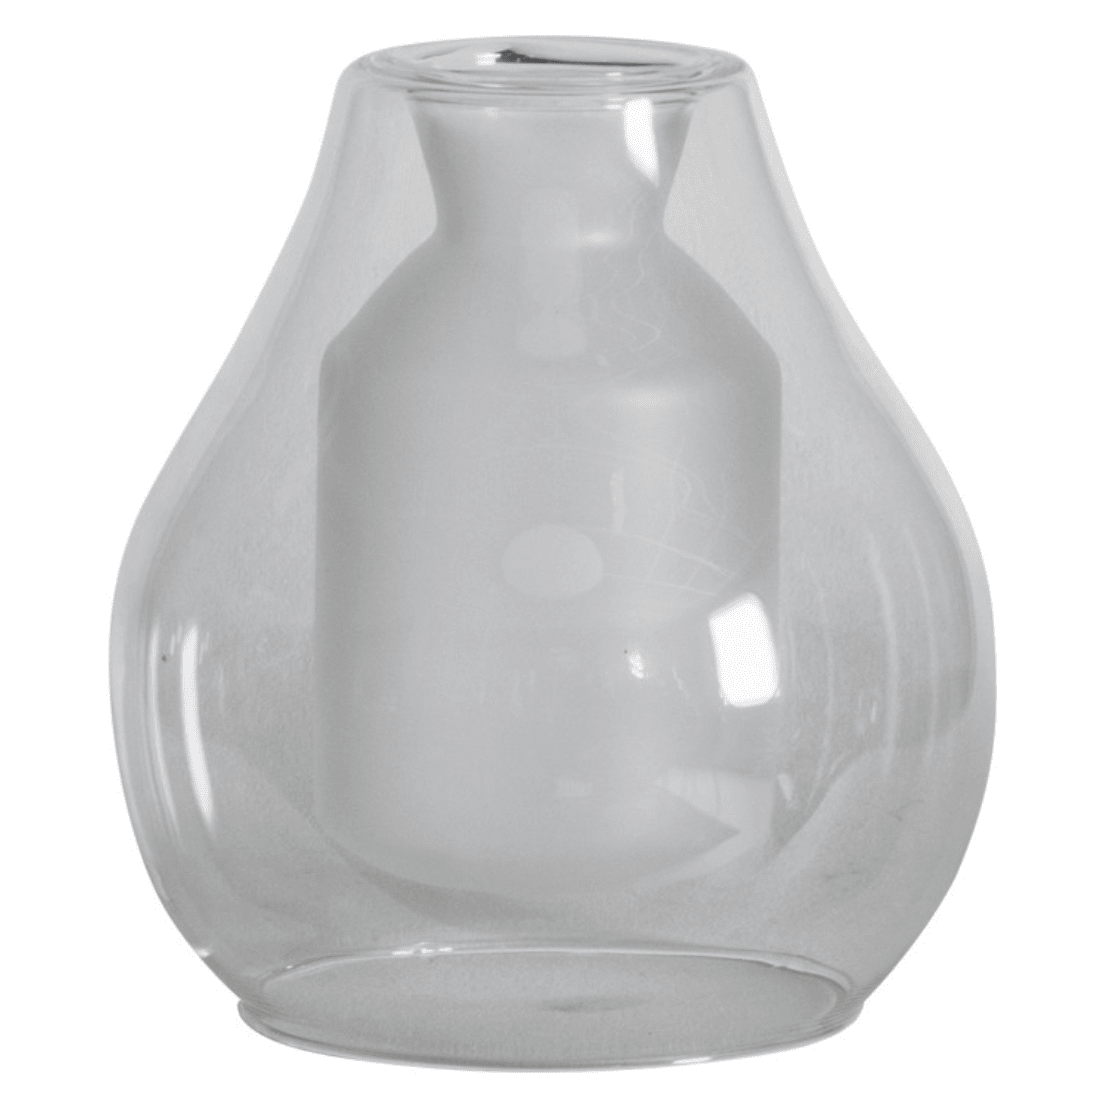 Suspended Round White Vase - Outlet - Save 20%